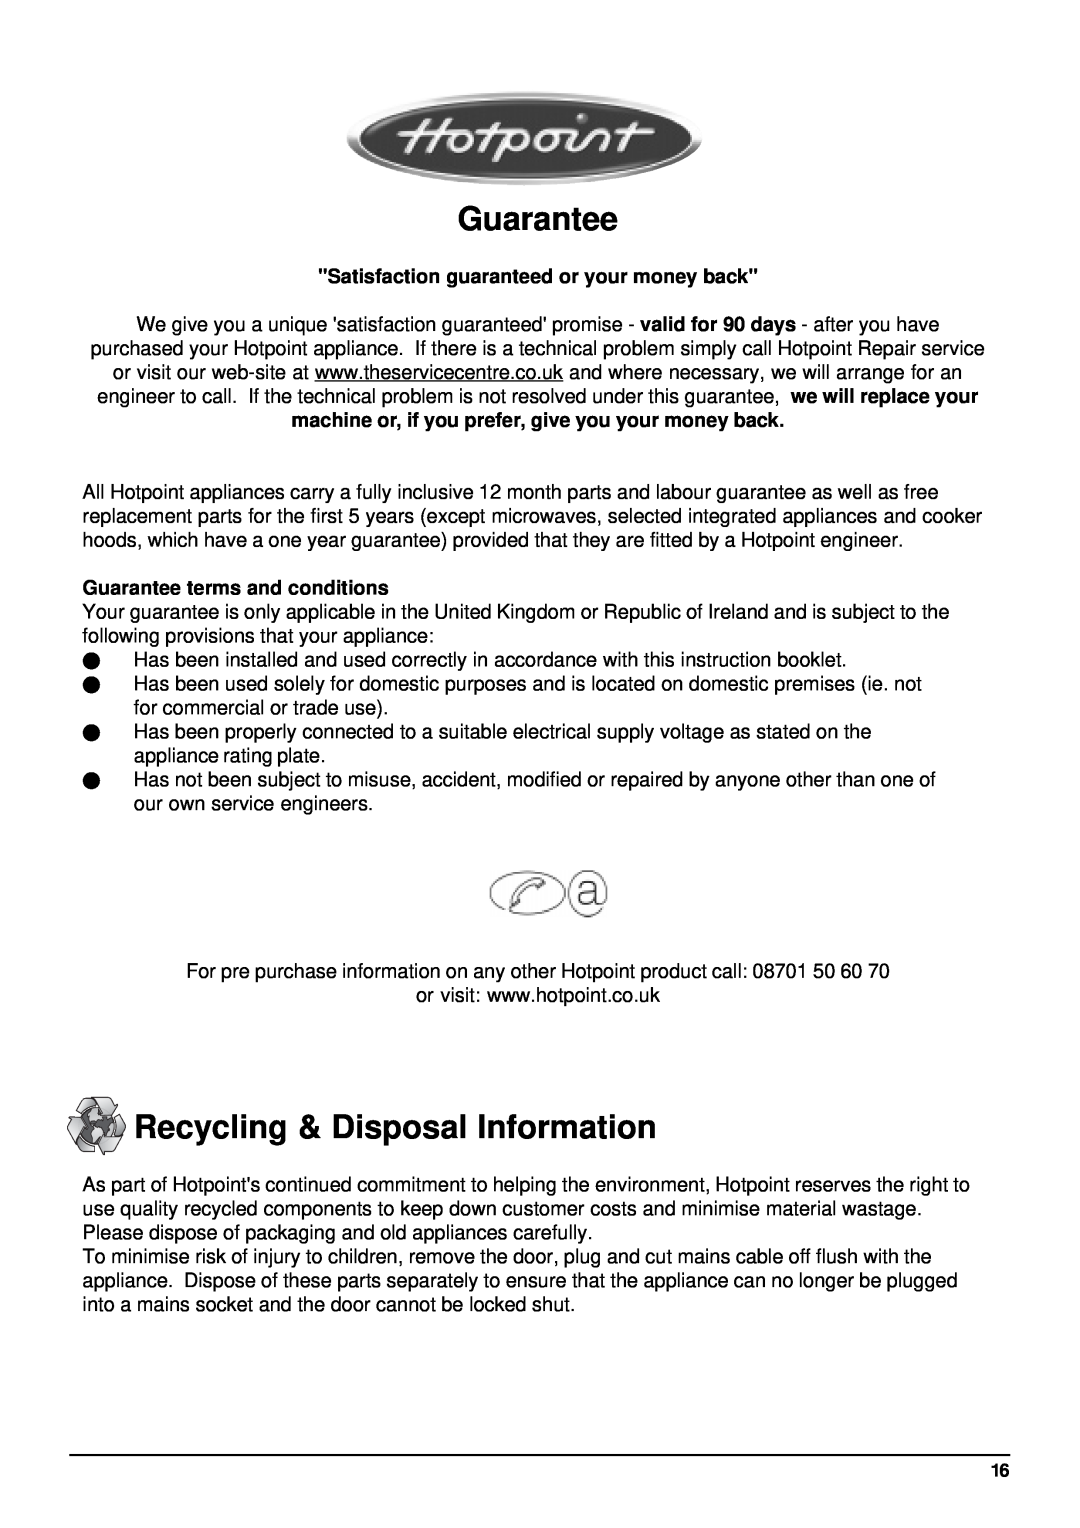 Hotpoint BFT68 manual Guarantee, Recycling & Disposal Information, Satisfaction guaranteed or your money back 